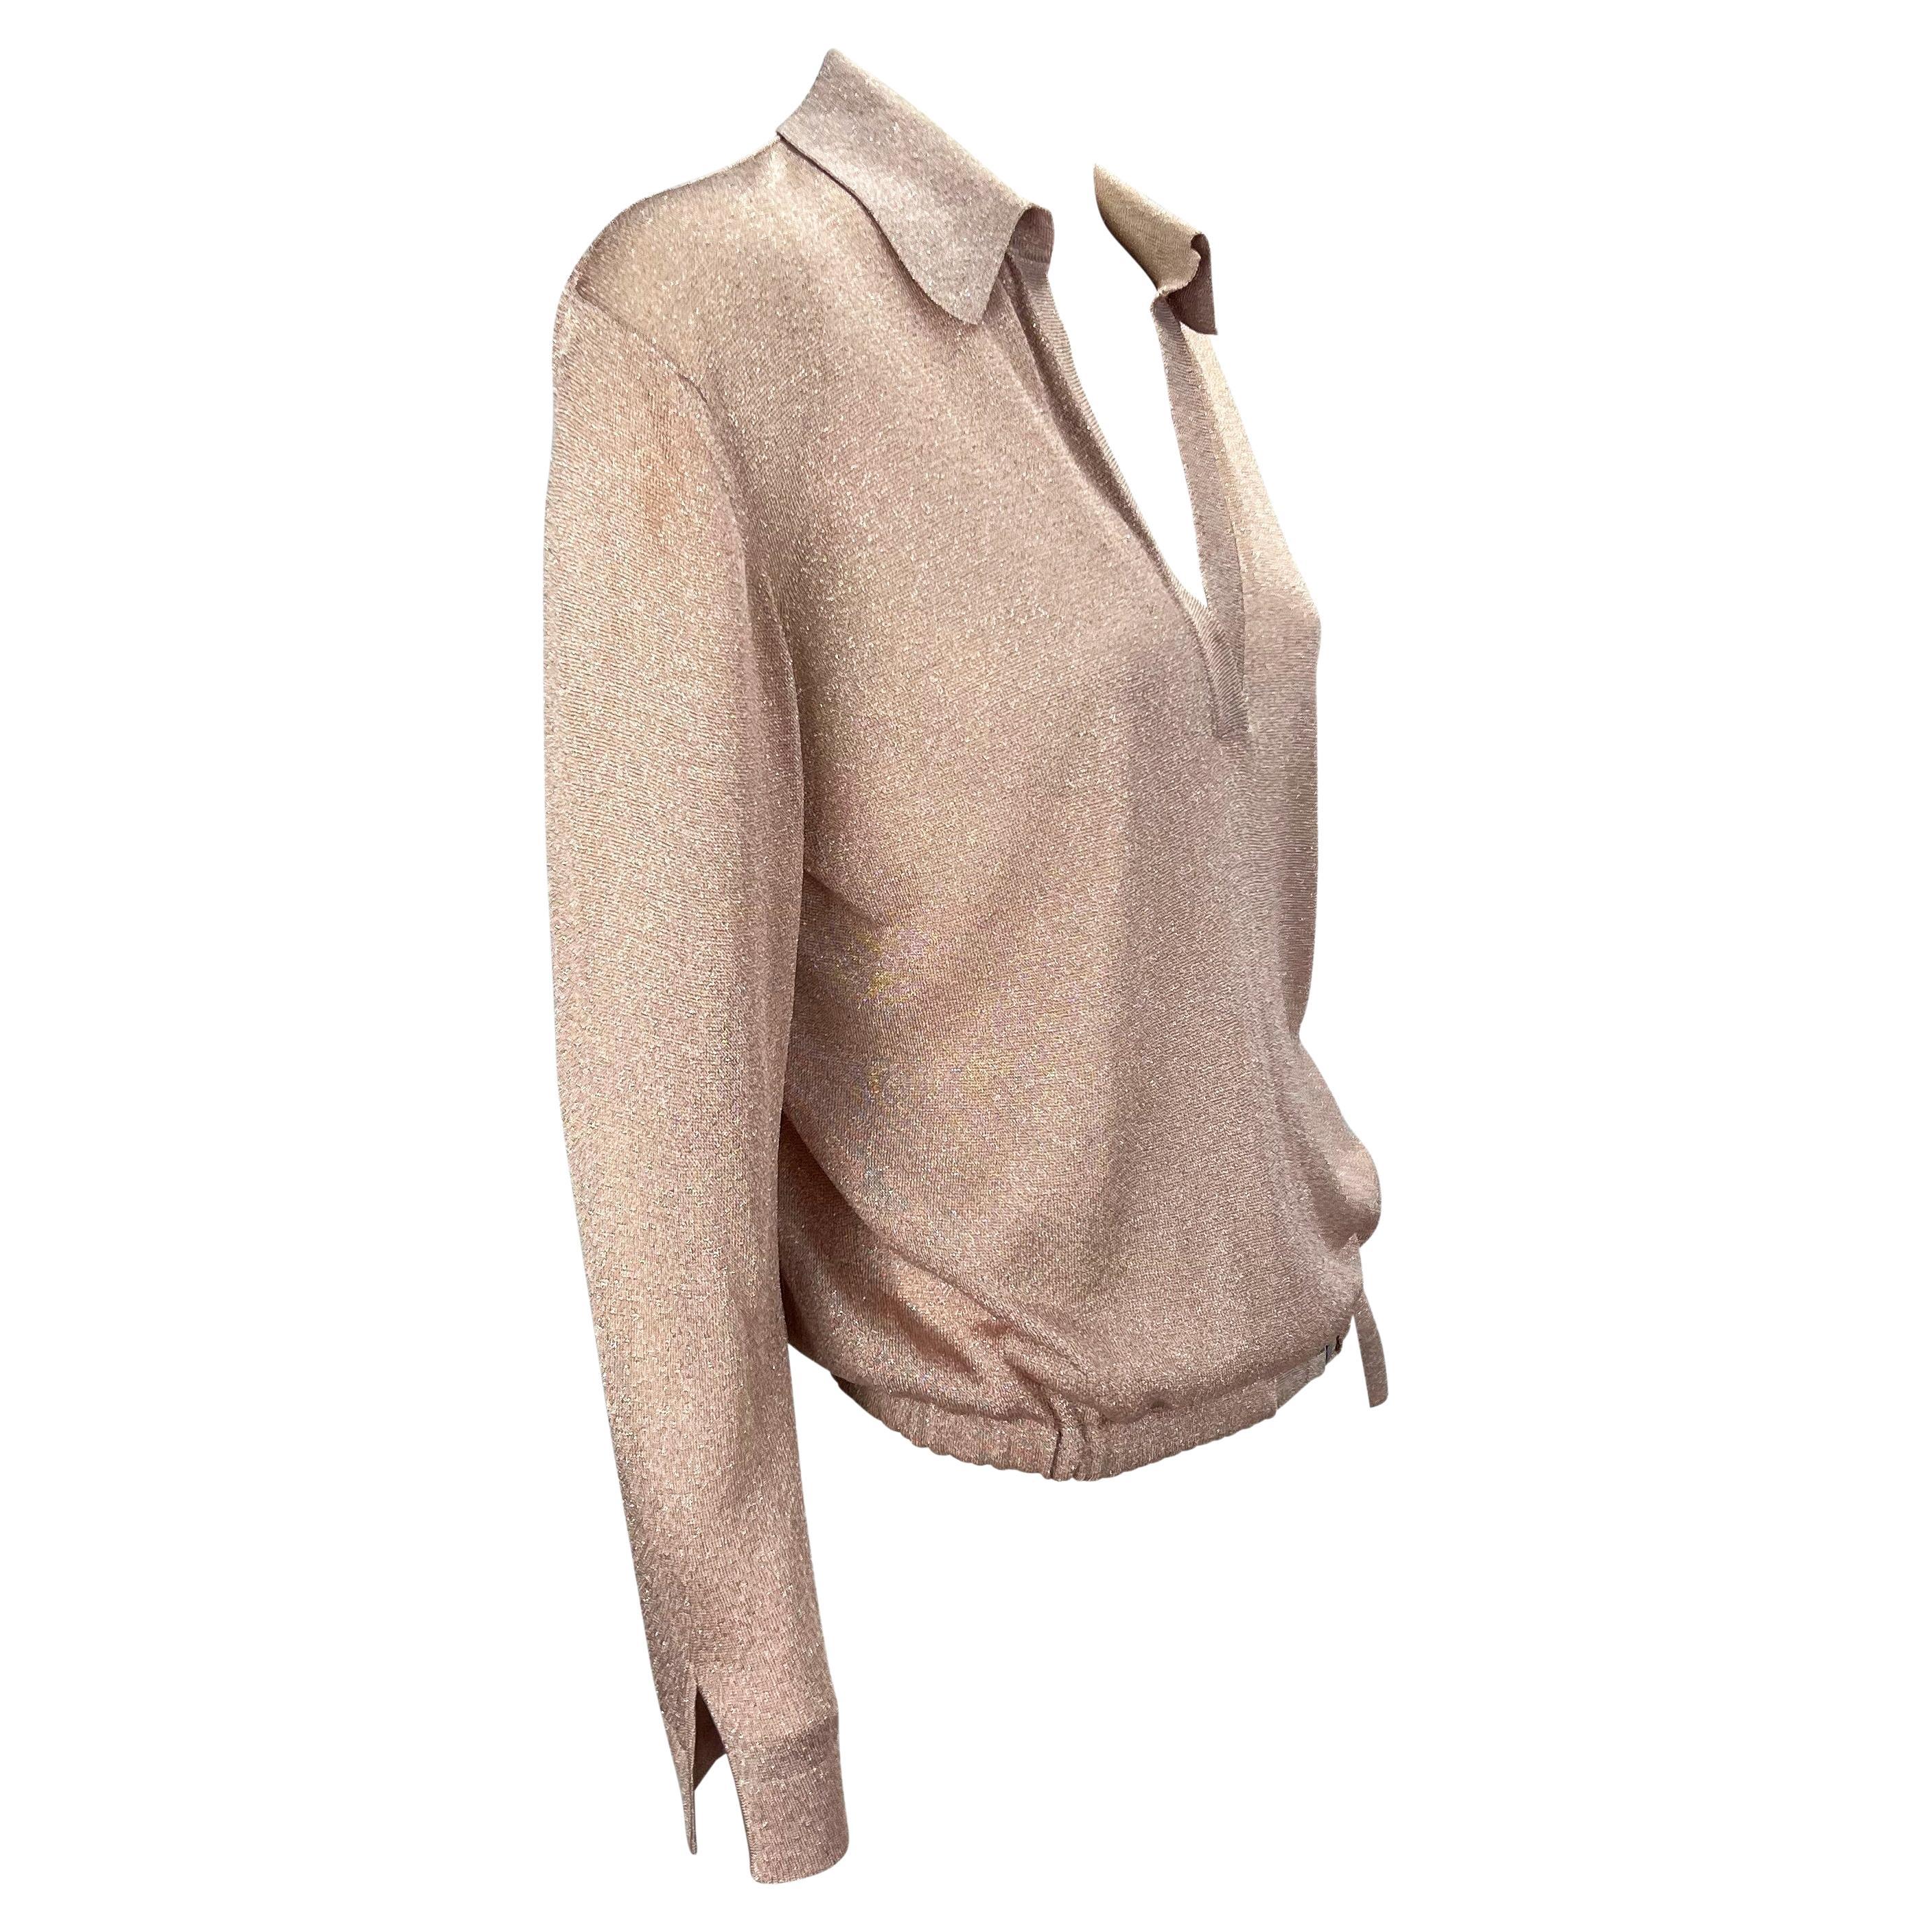 S/S 2000 Gucci by Tom Ford Runway Sheer Blush Pink Lurex Knit Belted Top For Sale 1